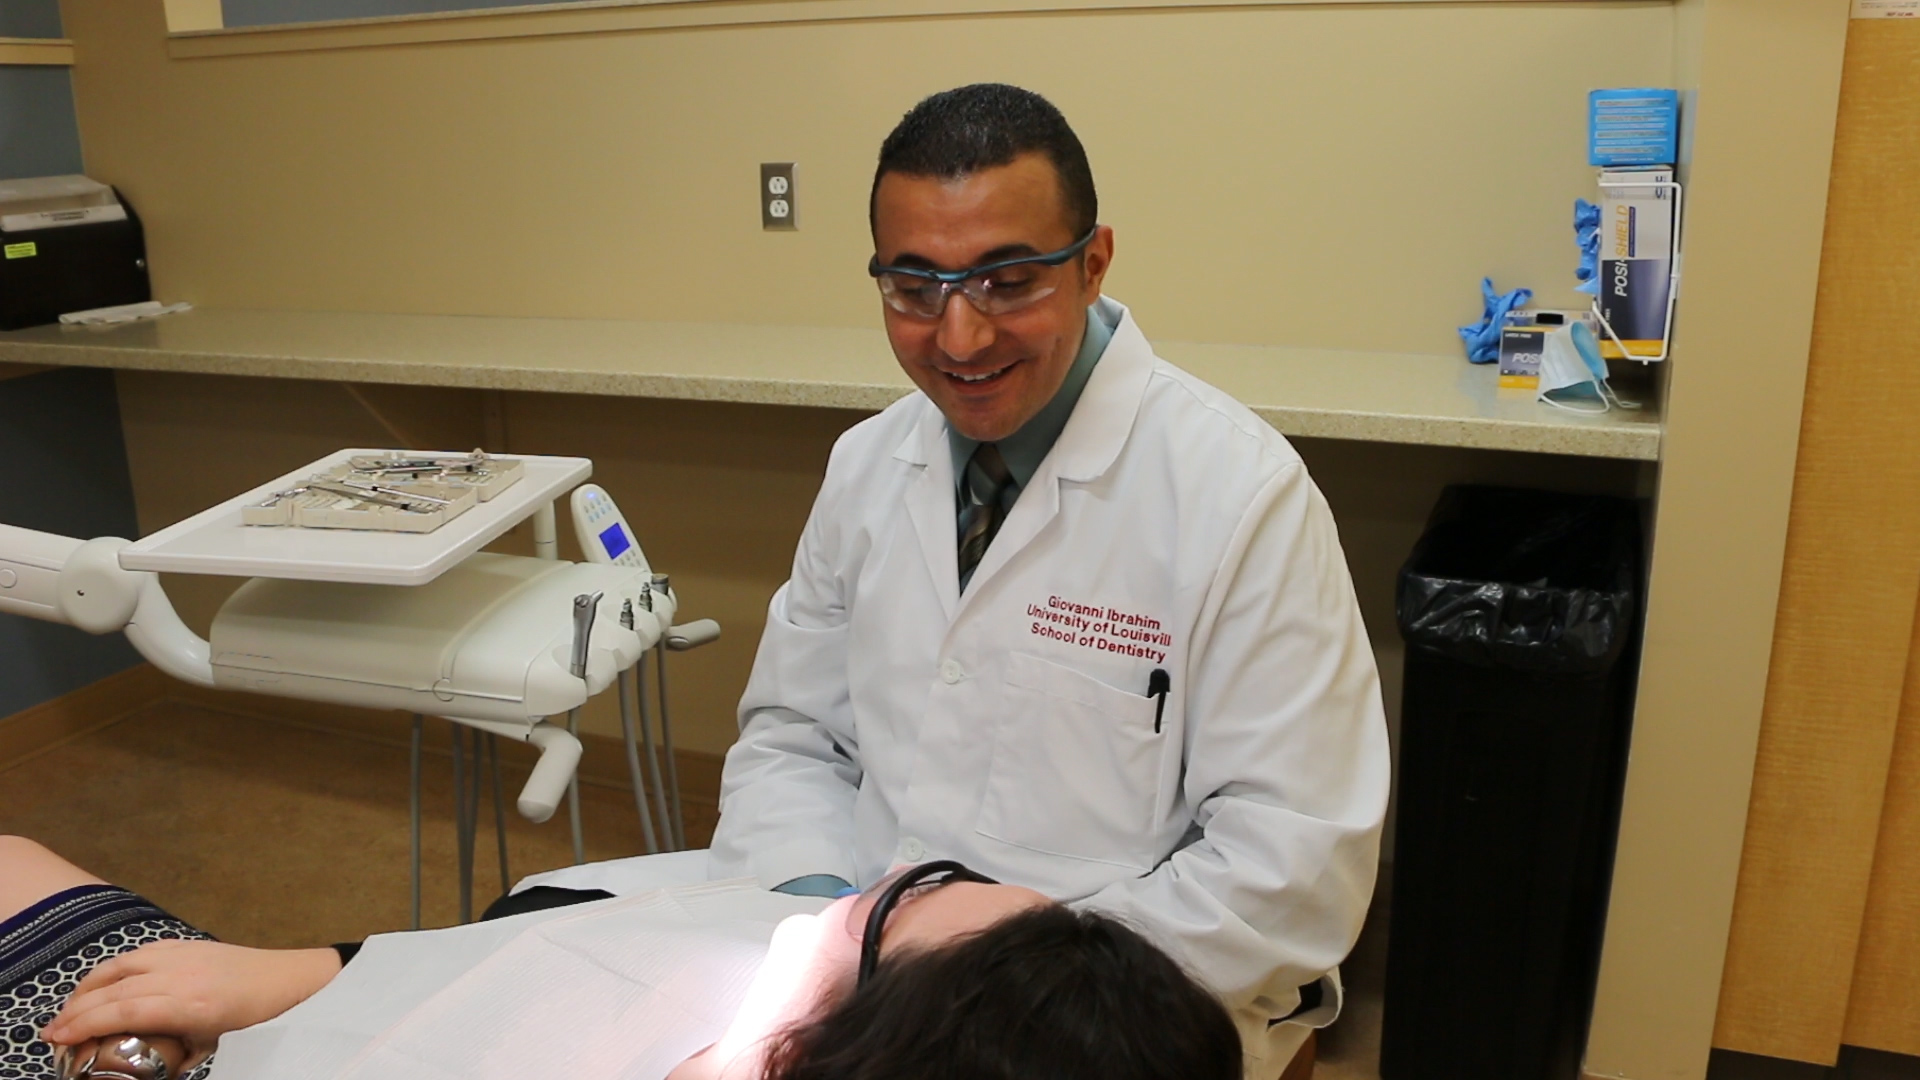 After serving in the NYPD, Giovanni Ibrahim went into dentistry to help people, and found his way to UofL.